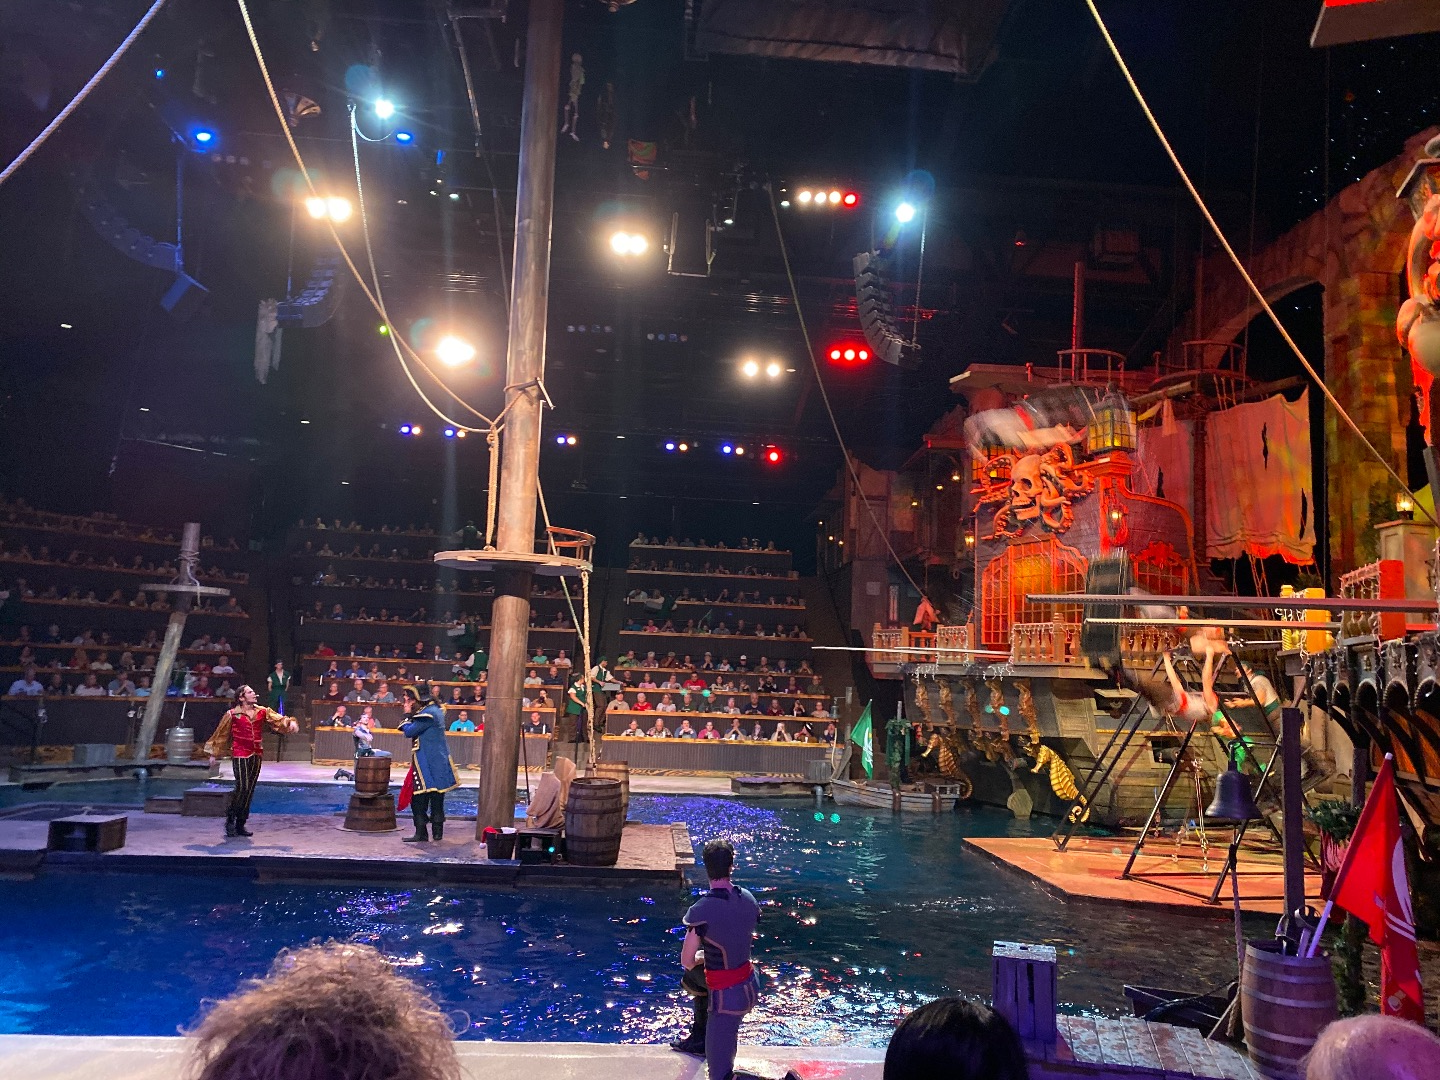 pirates voyage show pigeon forge tn